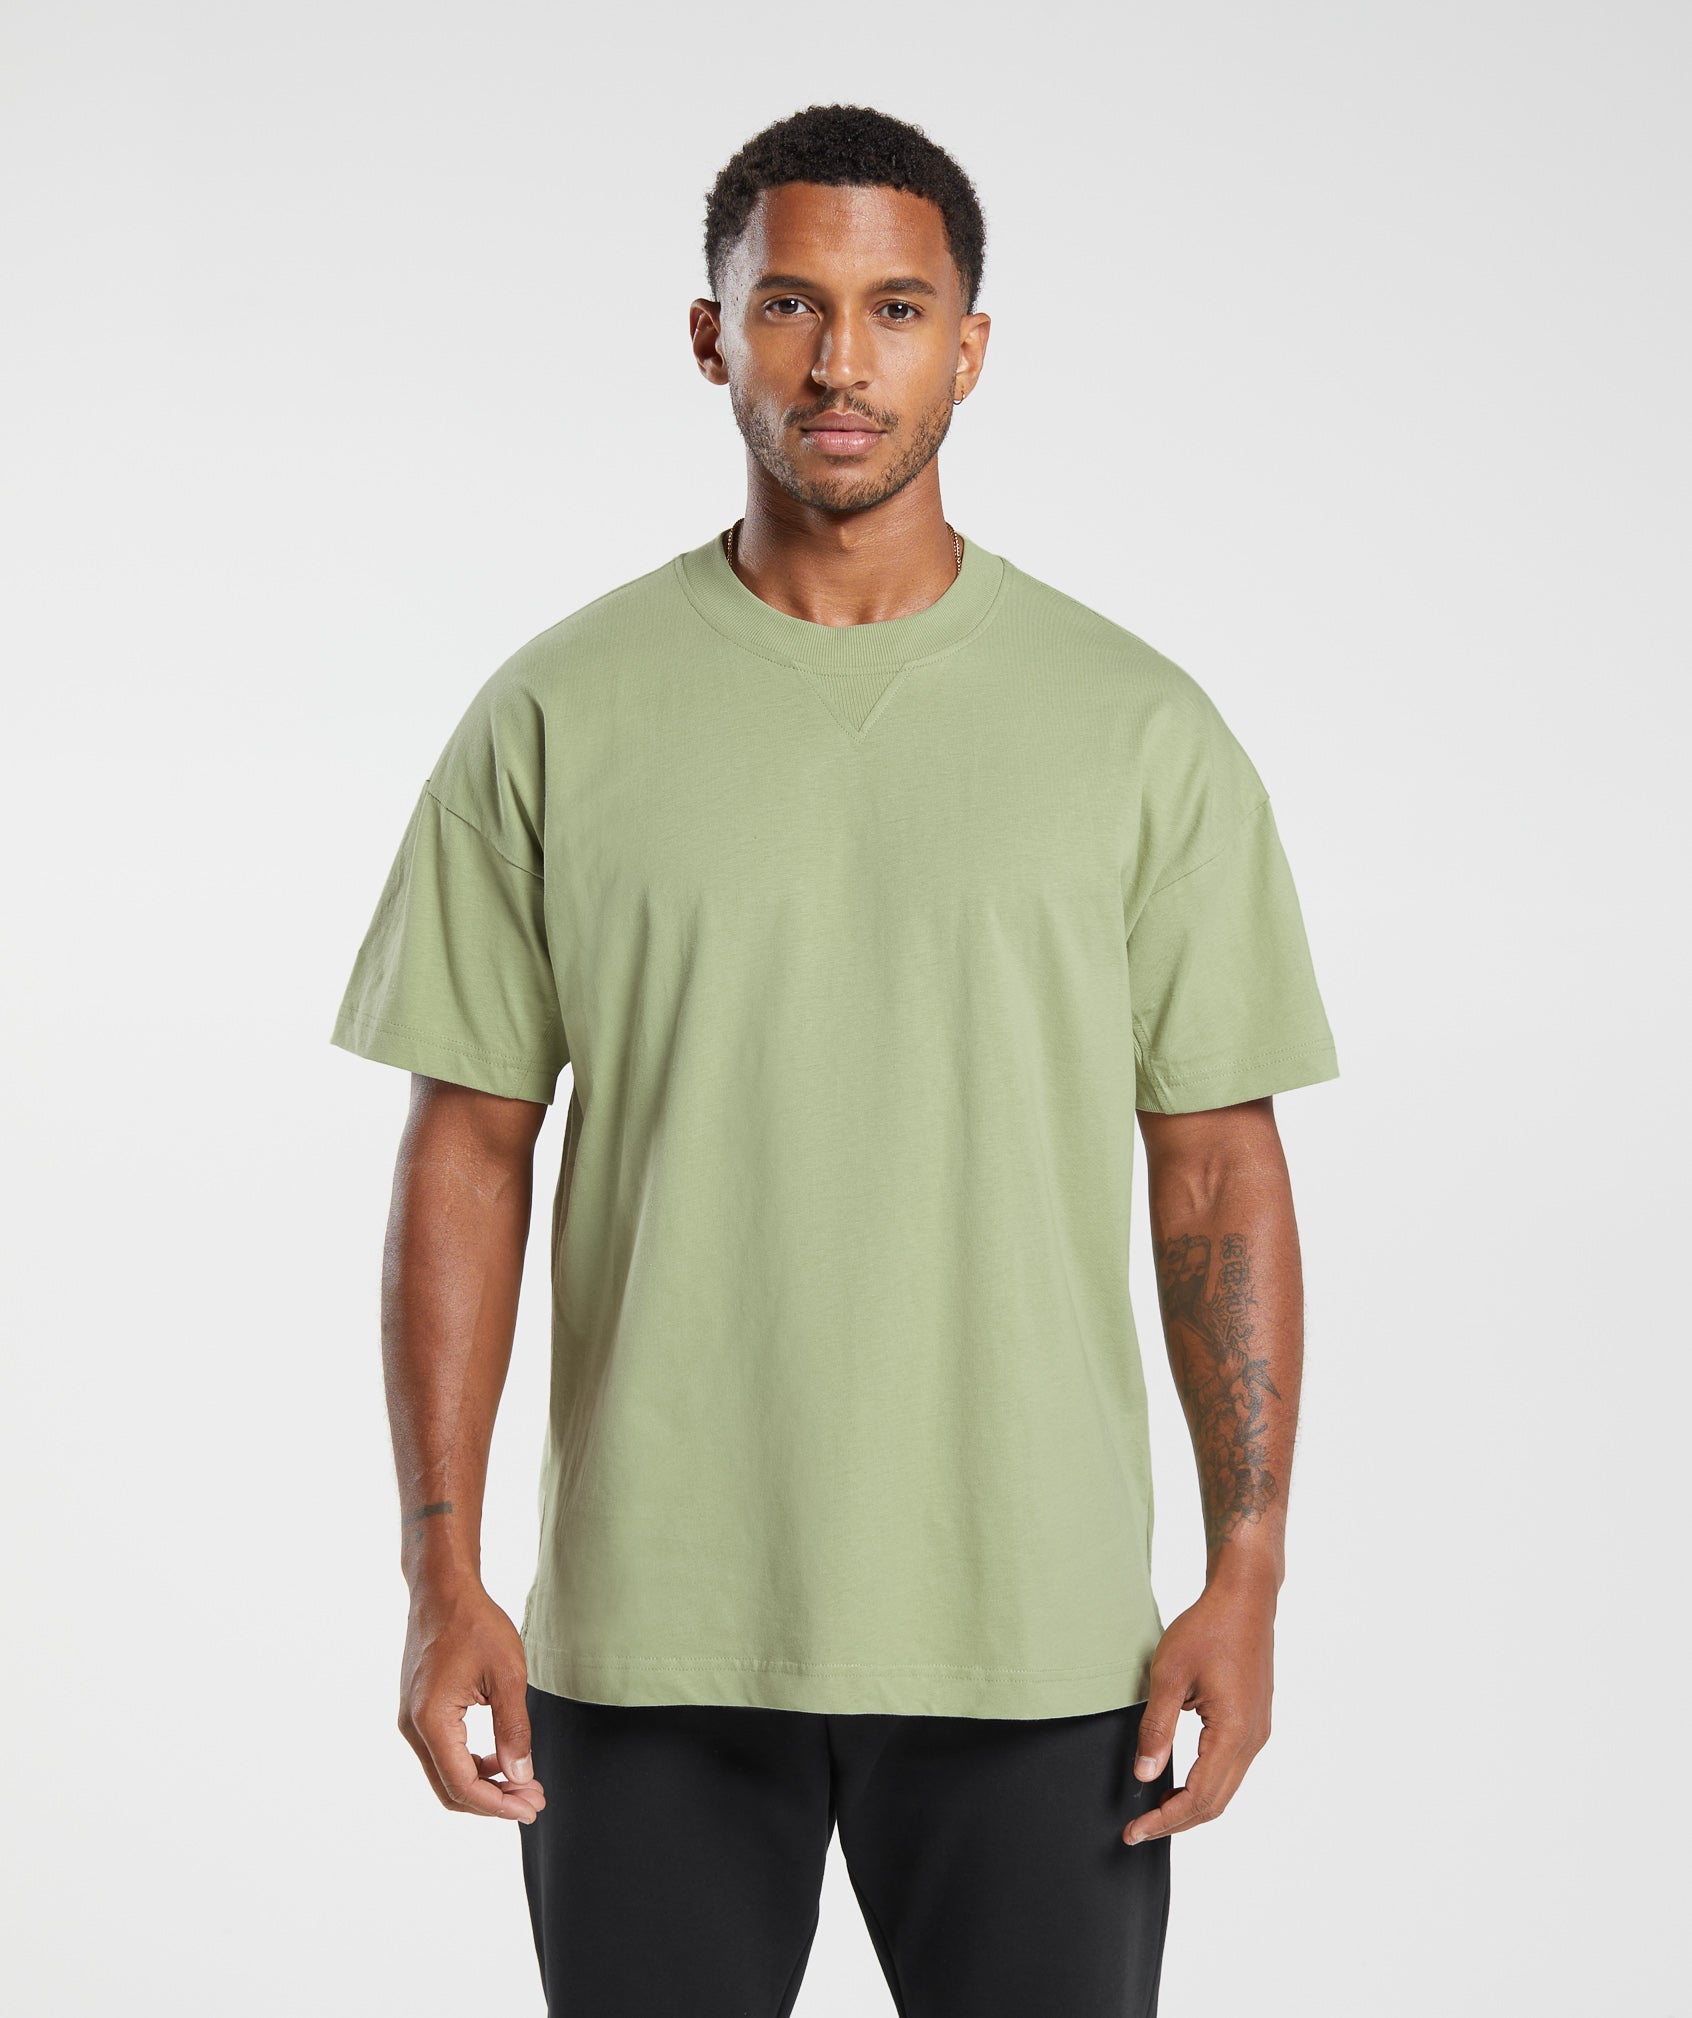 Rest Day Essentials T-Shirt in Light Sage Green is out of stock